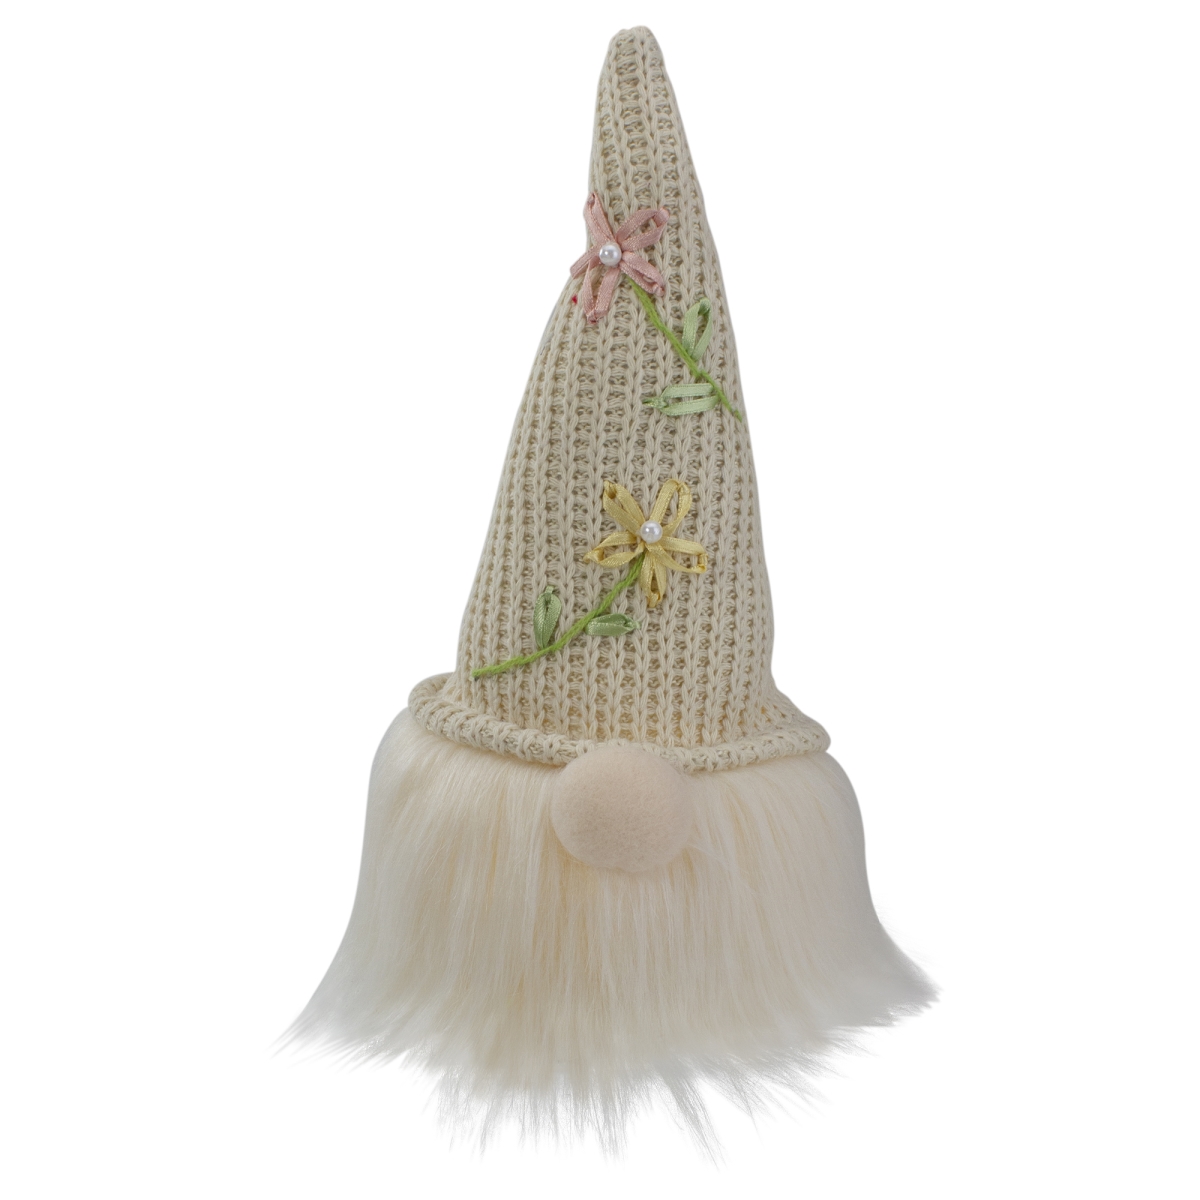 Picture of NorthLight 34739089 10 in. Lighted Cream Sitting Gnome Figure Head with Knitted Hat